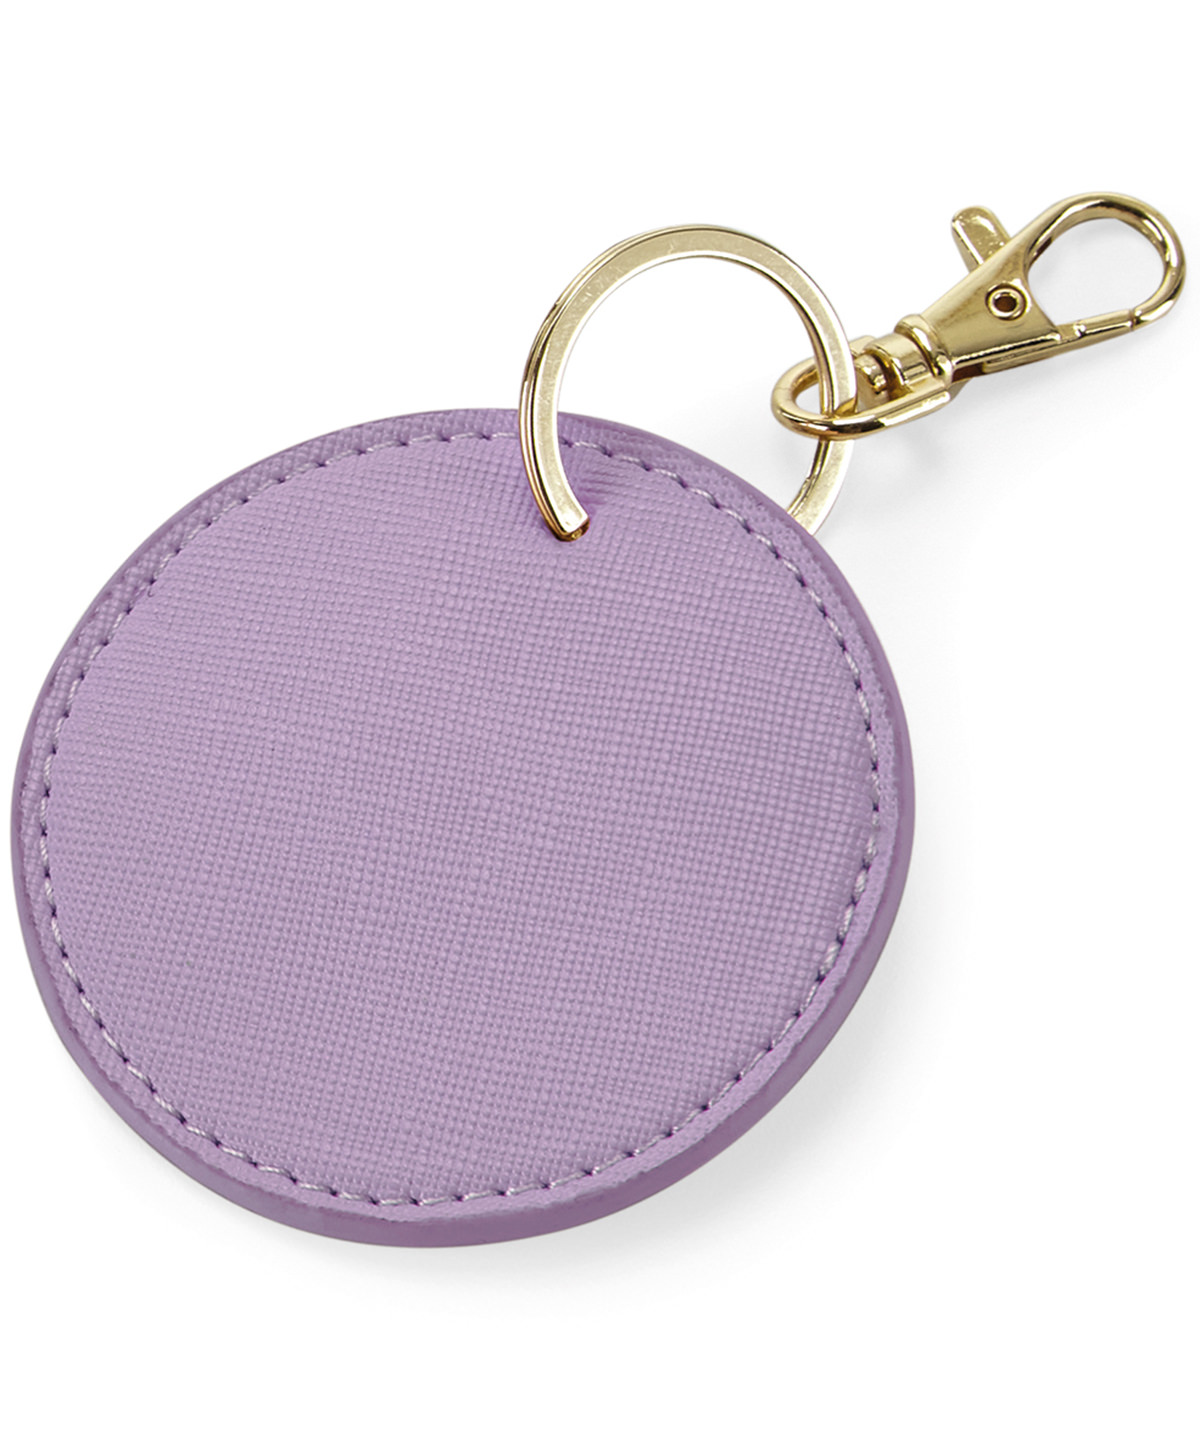 Boutique Circular Keyclip Lilac Size One Size